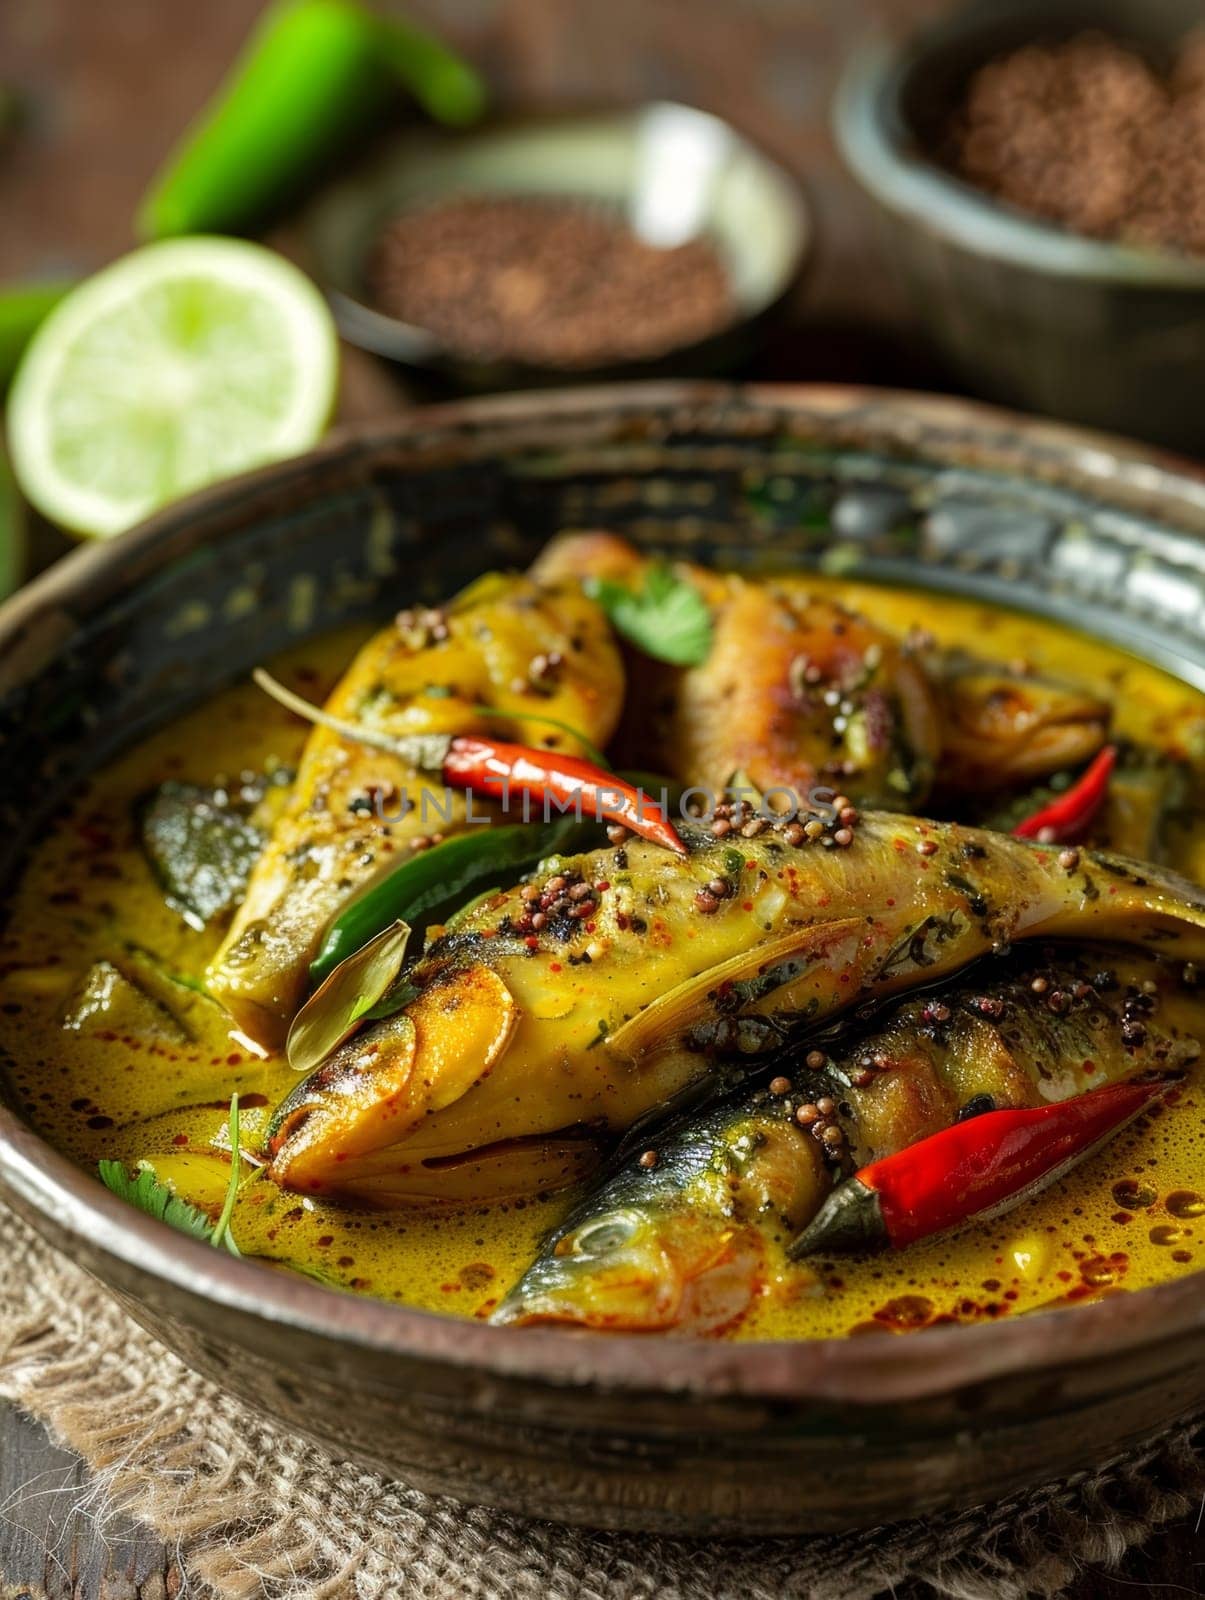 Authentic Bangladeshi hilsa fish curry served in a traditional bowl, seasoned with aromatic turmeric and mustard seeds. This flavorful and creamy dish represents rich culinary heritage of Bangladesh